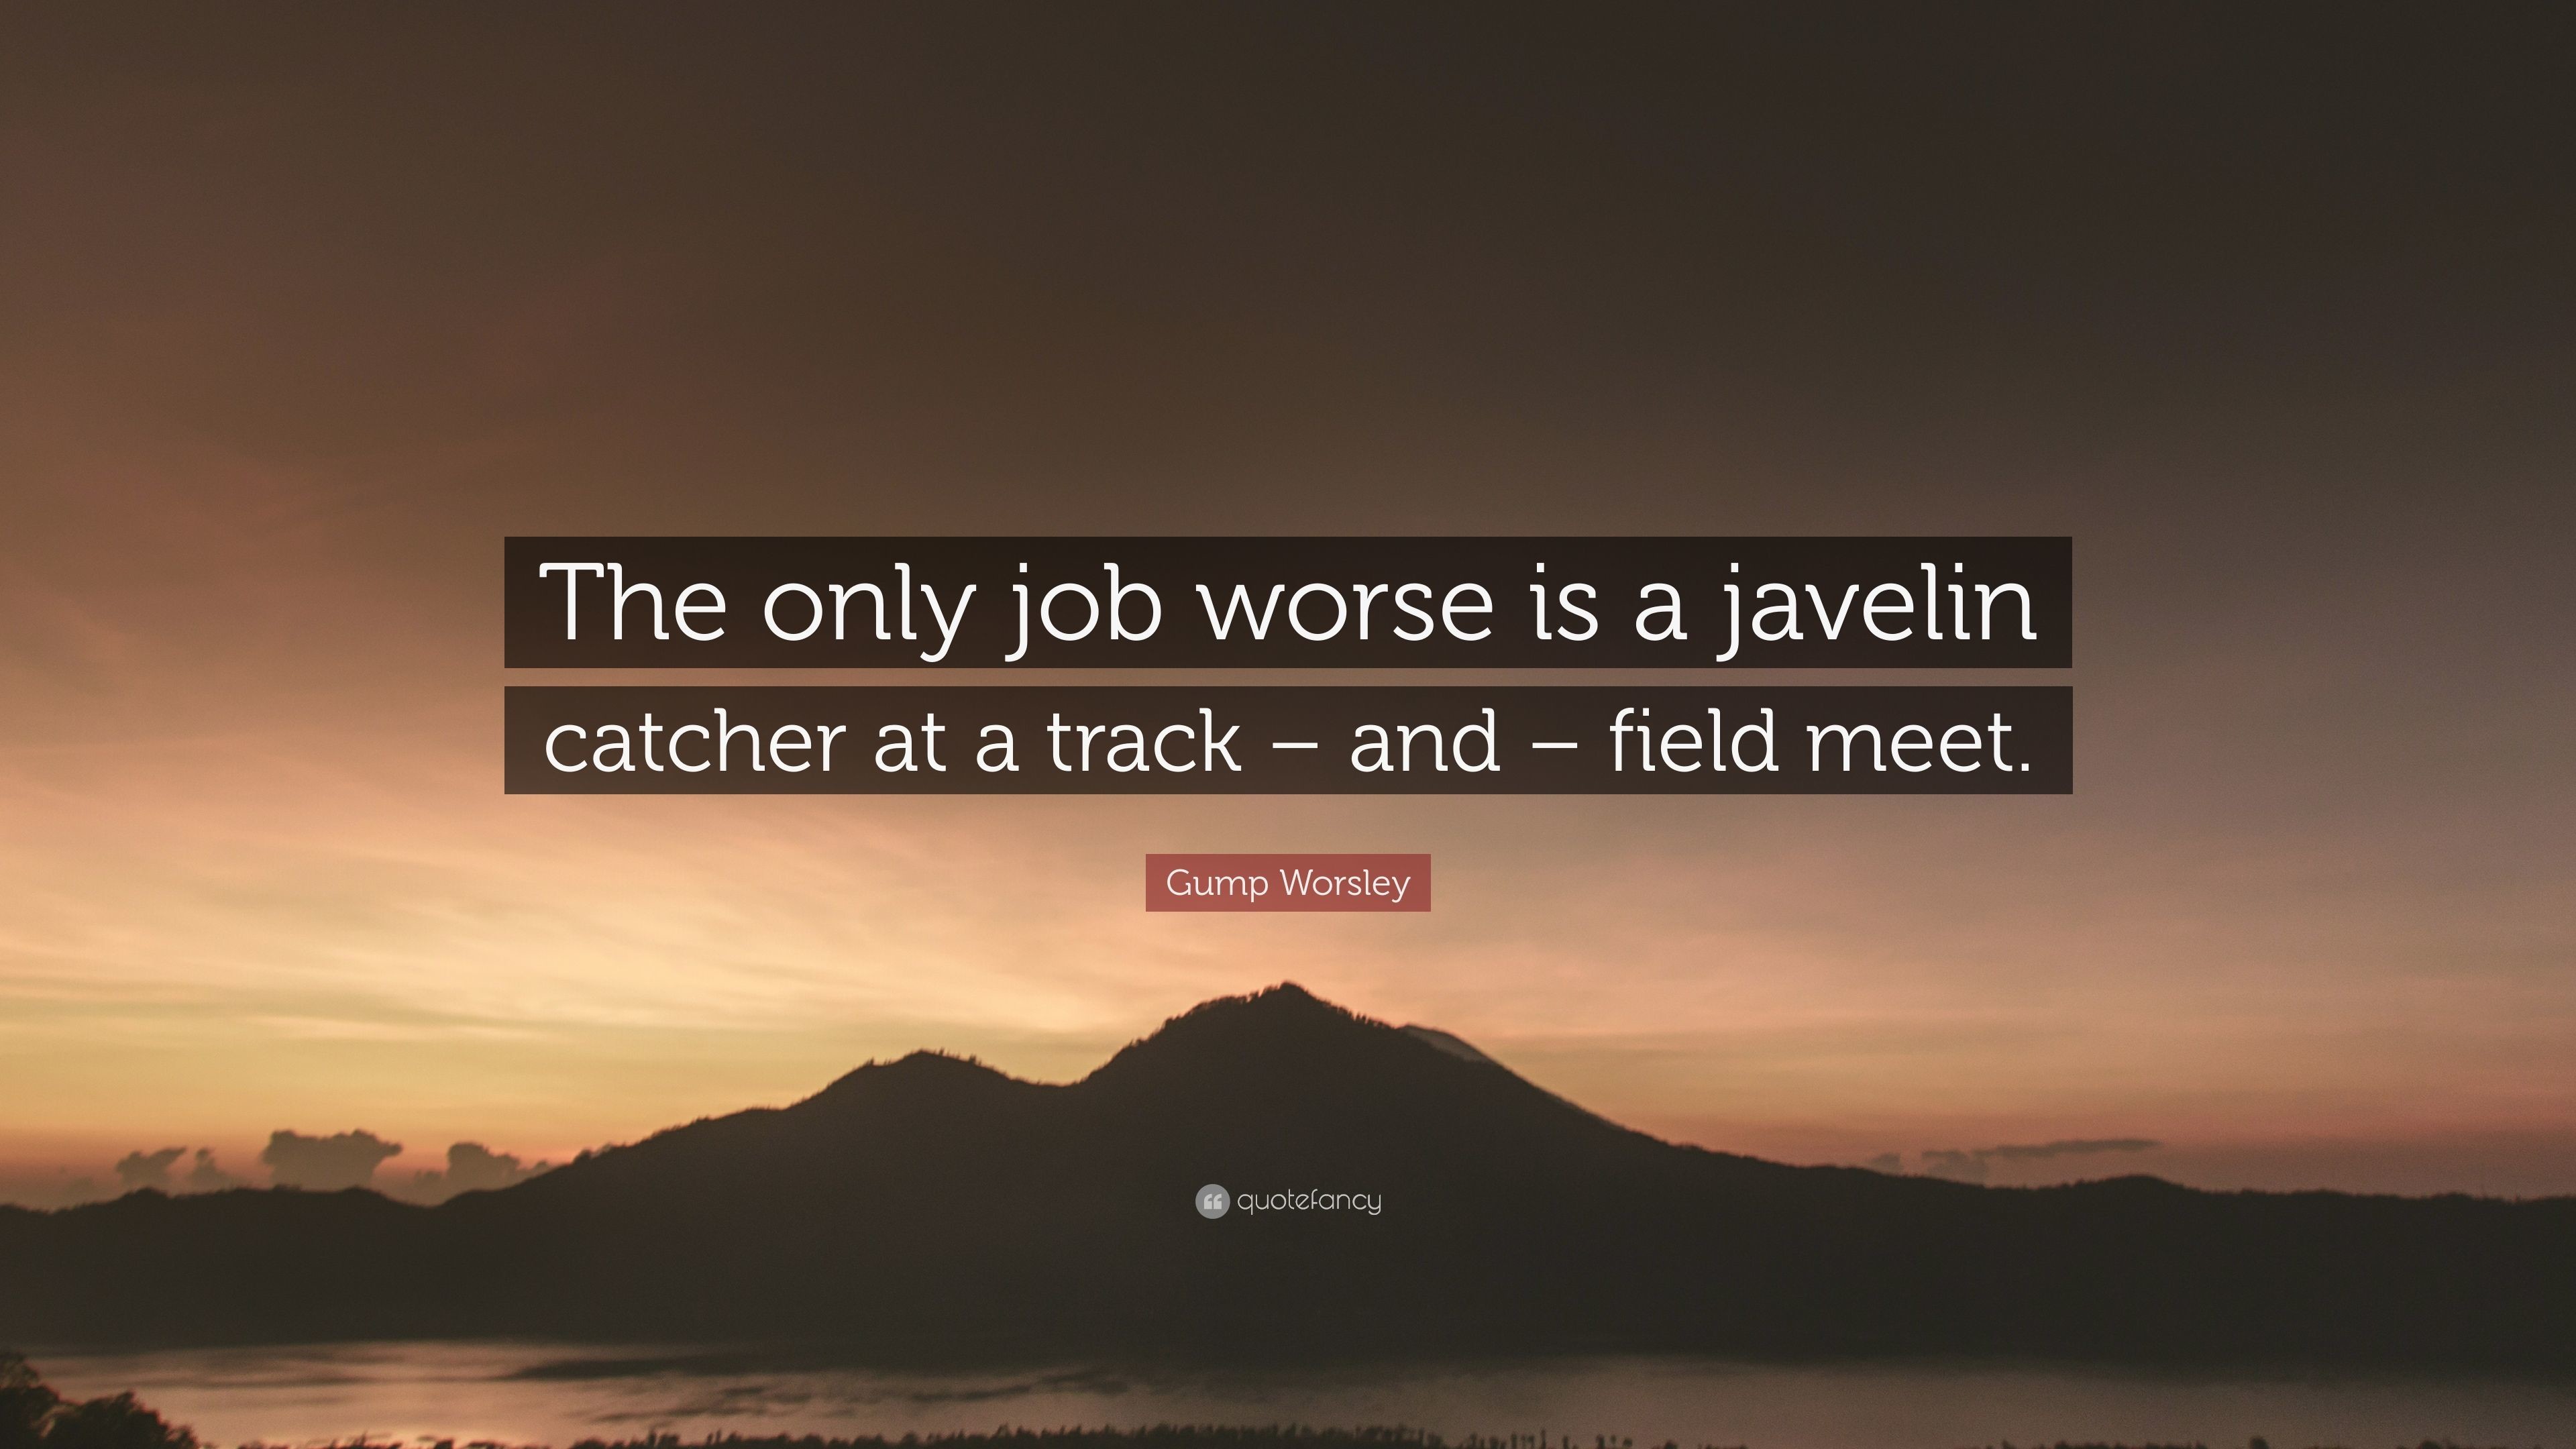 3840x2160 Gump Worsley Quote: “The only job worse is a javelin catcher at a track